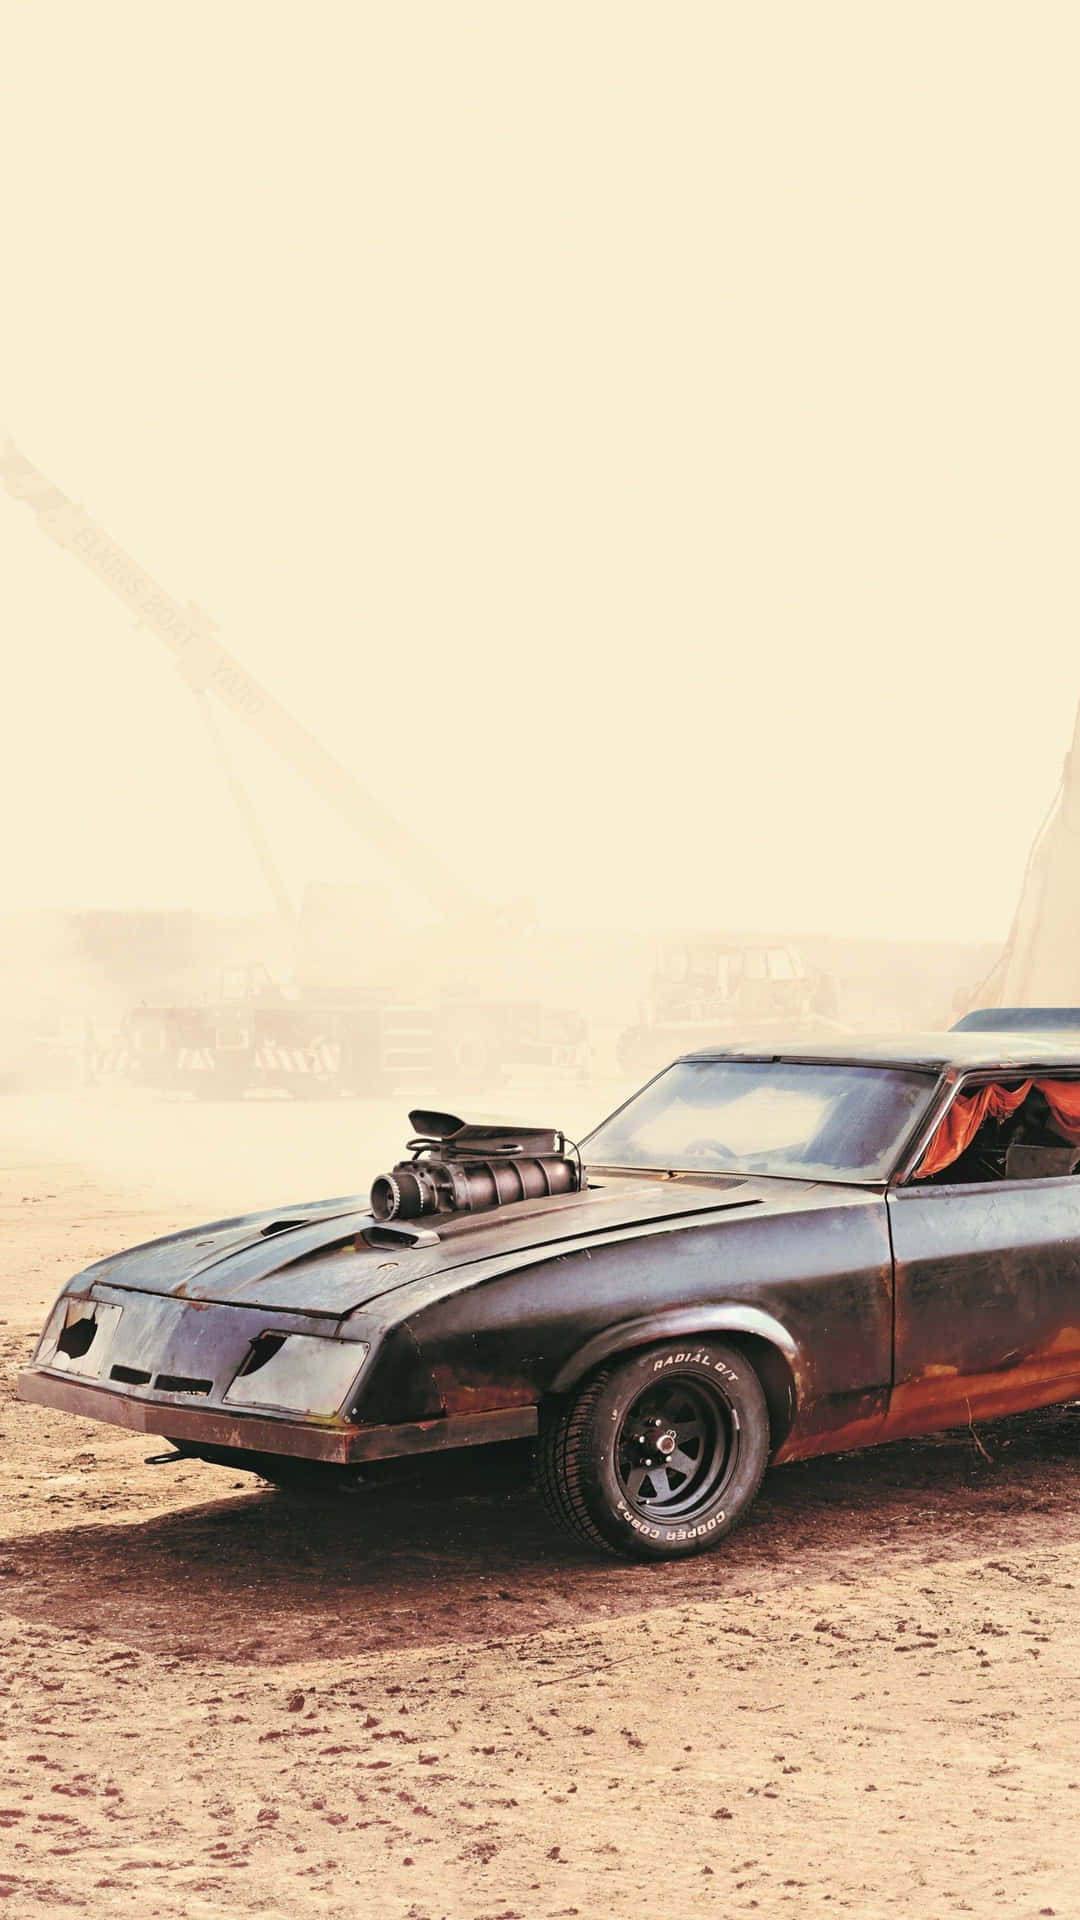 Mad Max_ Fury Road_ Vehicle_ Desert_ Background Wallpaper